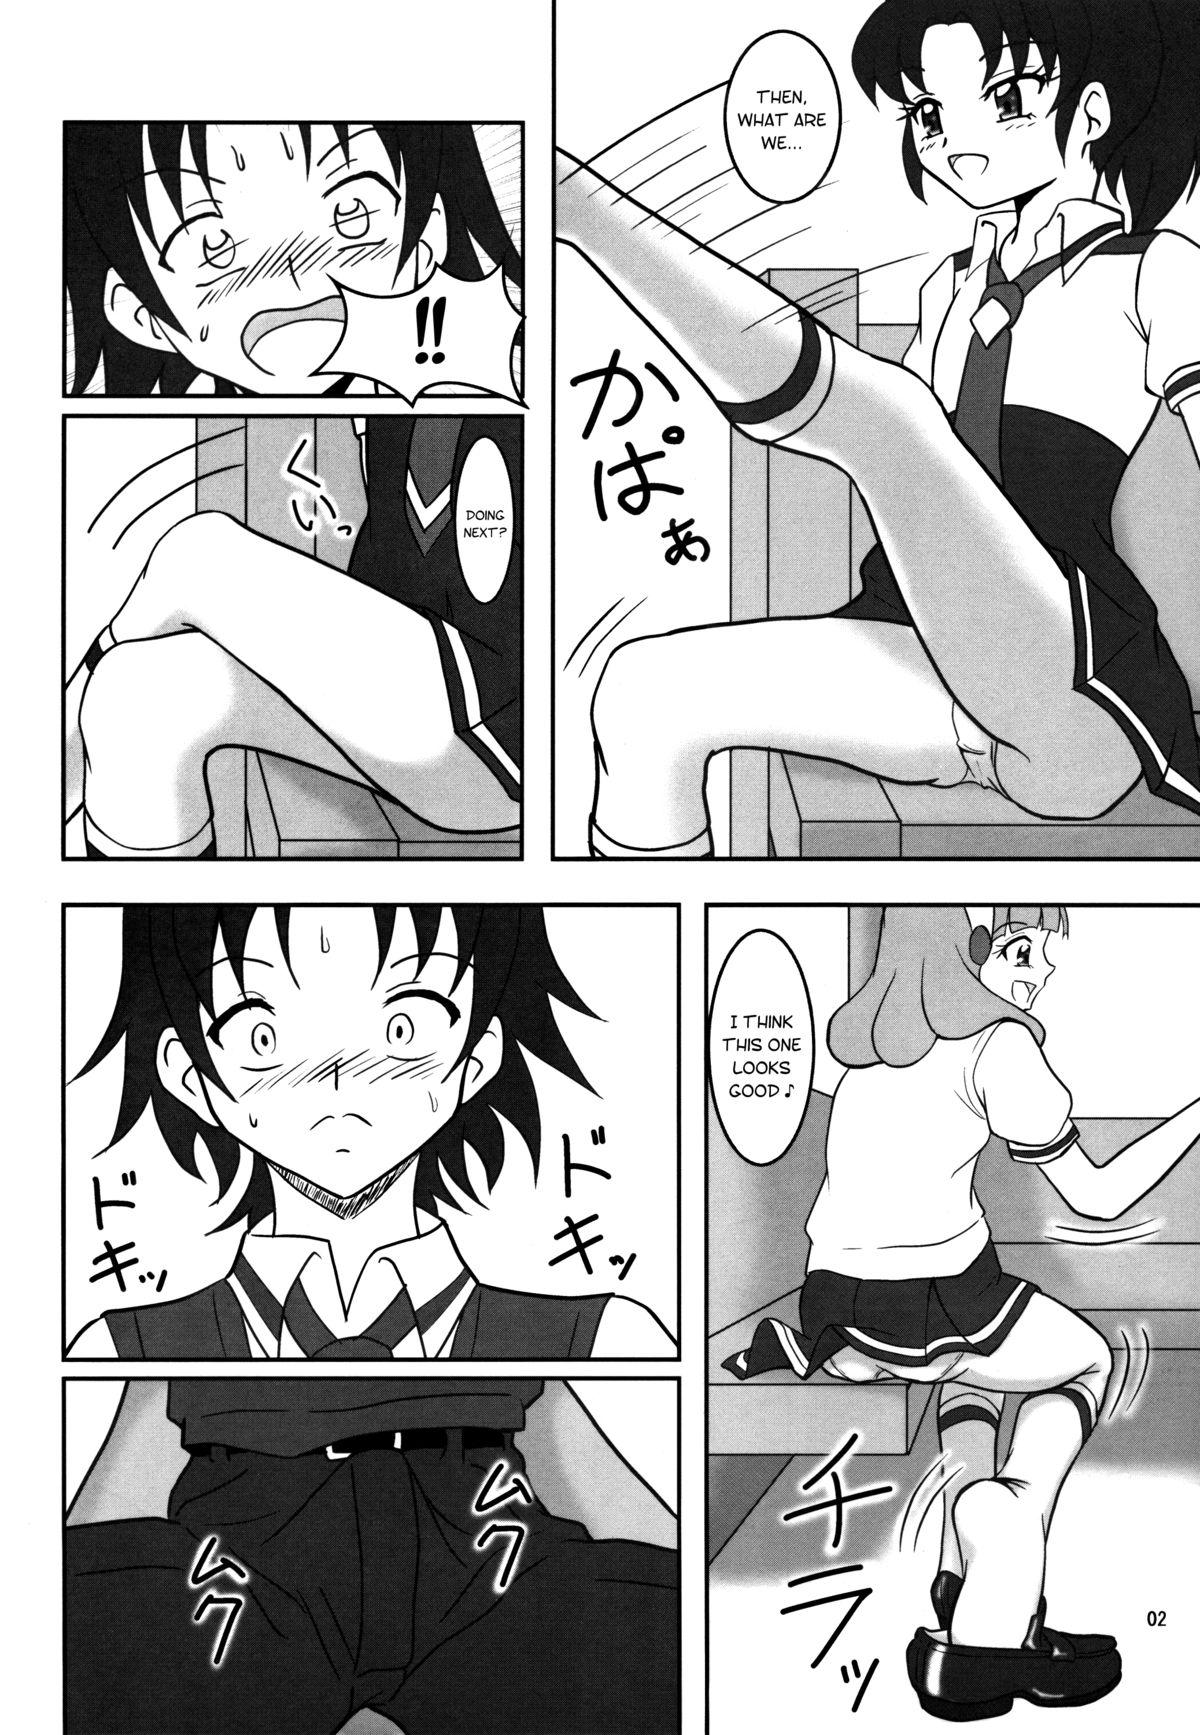 Freak Smell Zuricure | Smell Footycure - Smile precure Erotic - Page 3